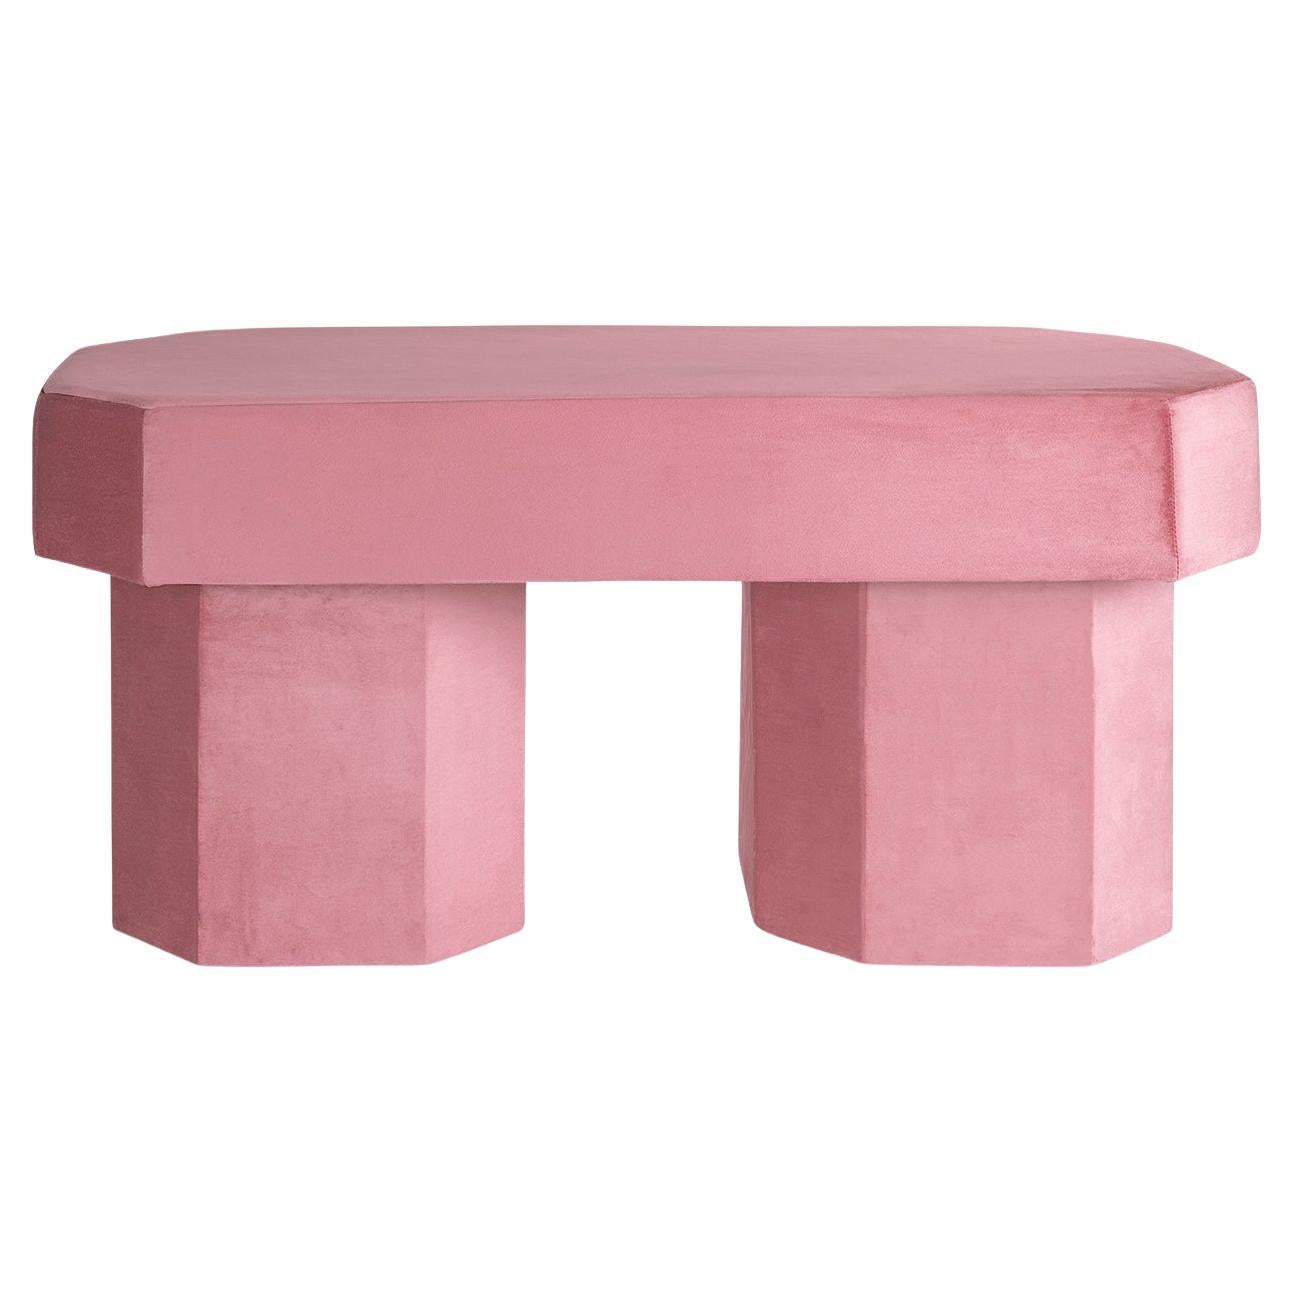 Viva Pink Bench by Houtique